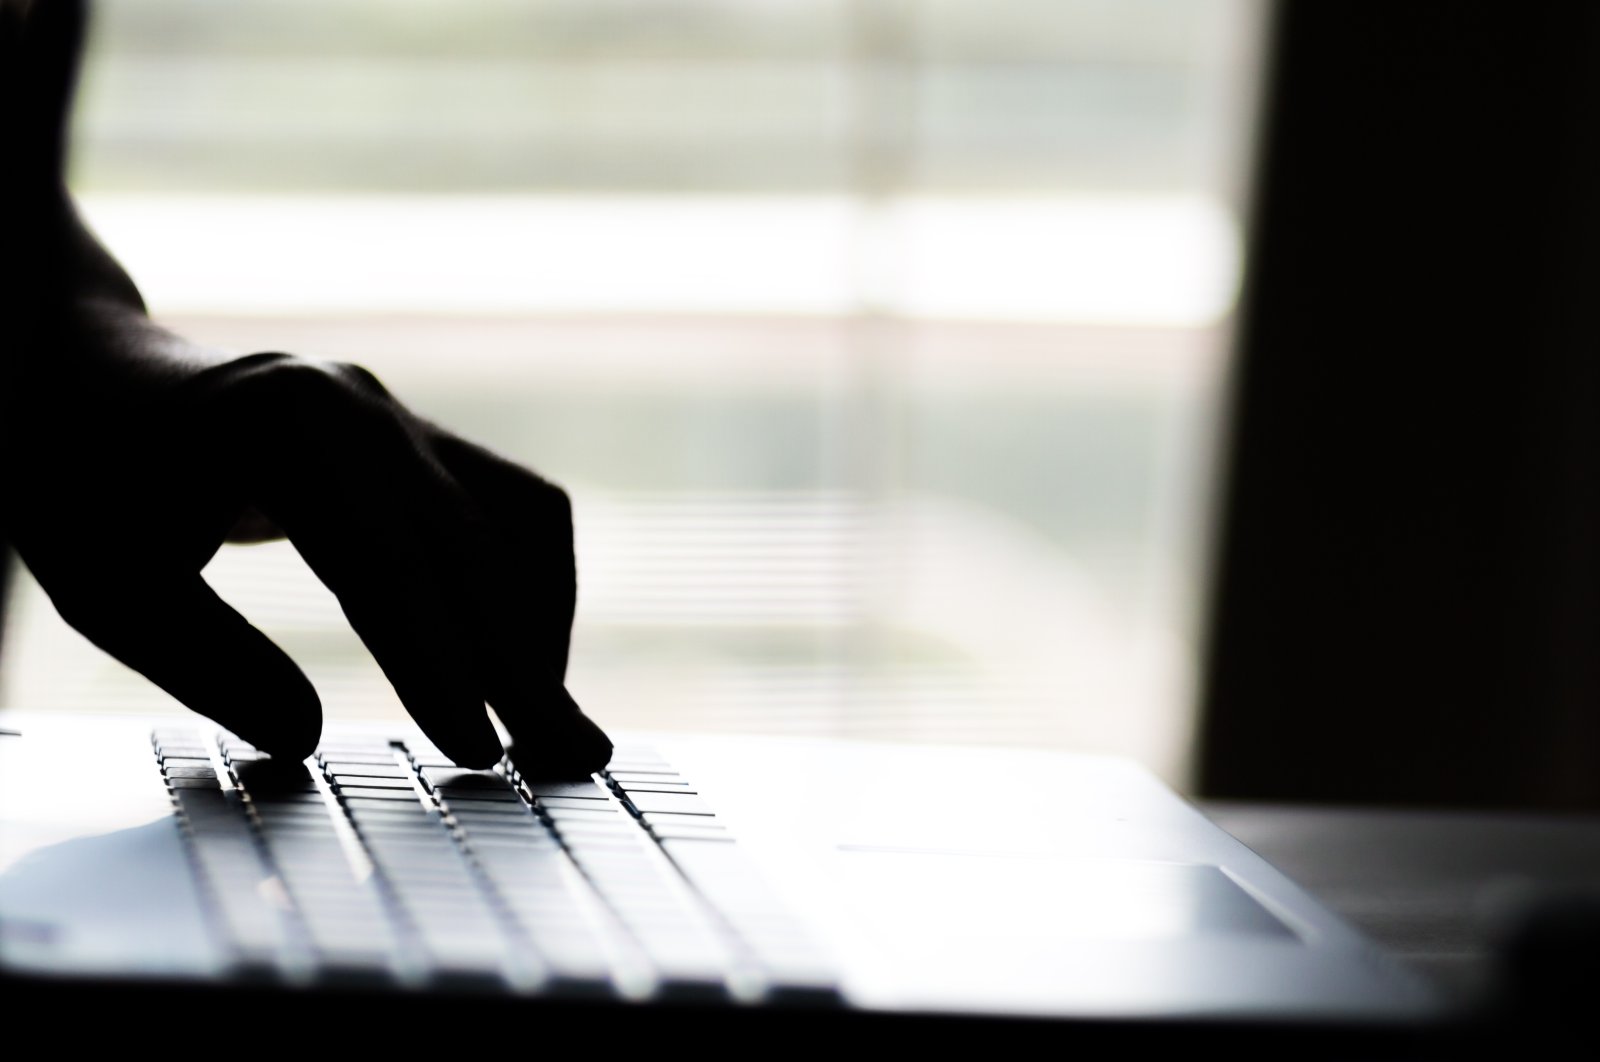 A hand reaching out through the screen of a laptop computer, signifying cybercrime. (Shutterstock)